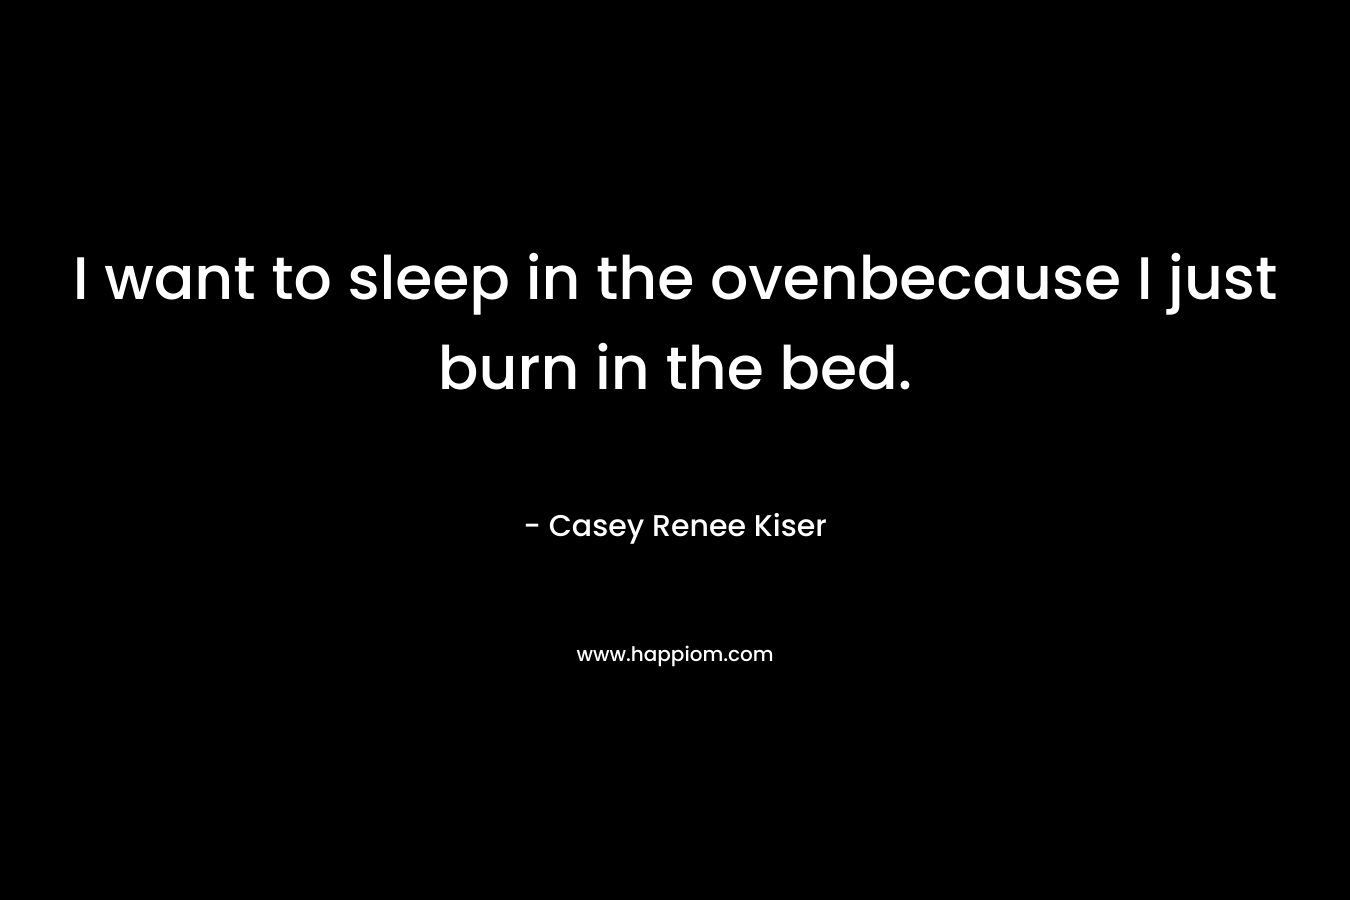 I want to sleep in the ovenbecause I just burn in the bed. – Casey Renee Kiser